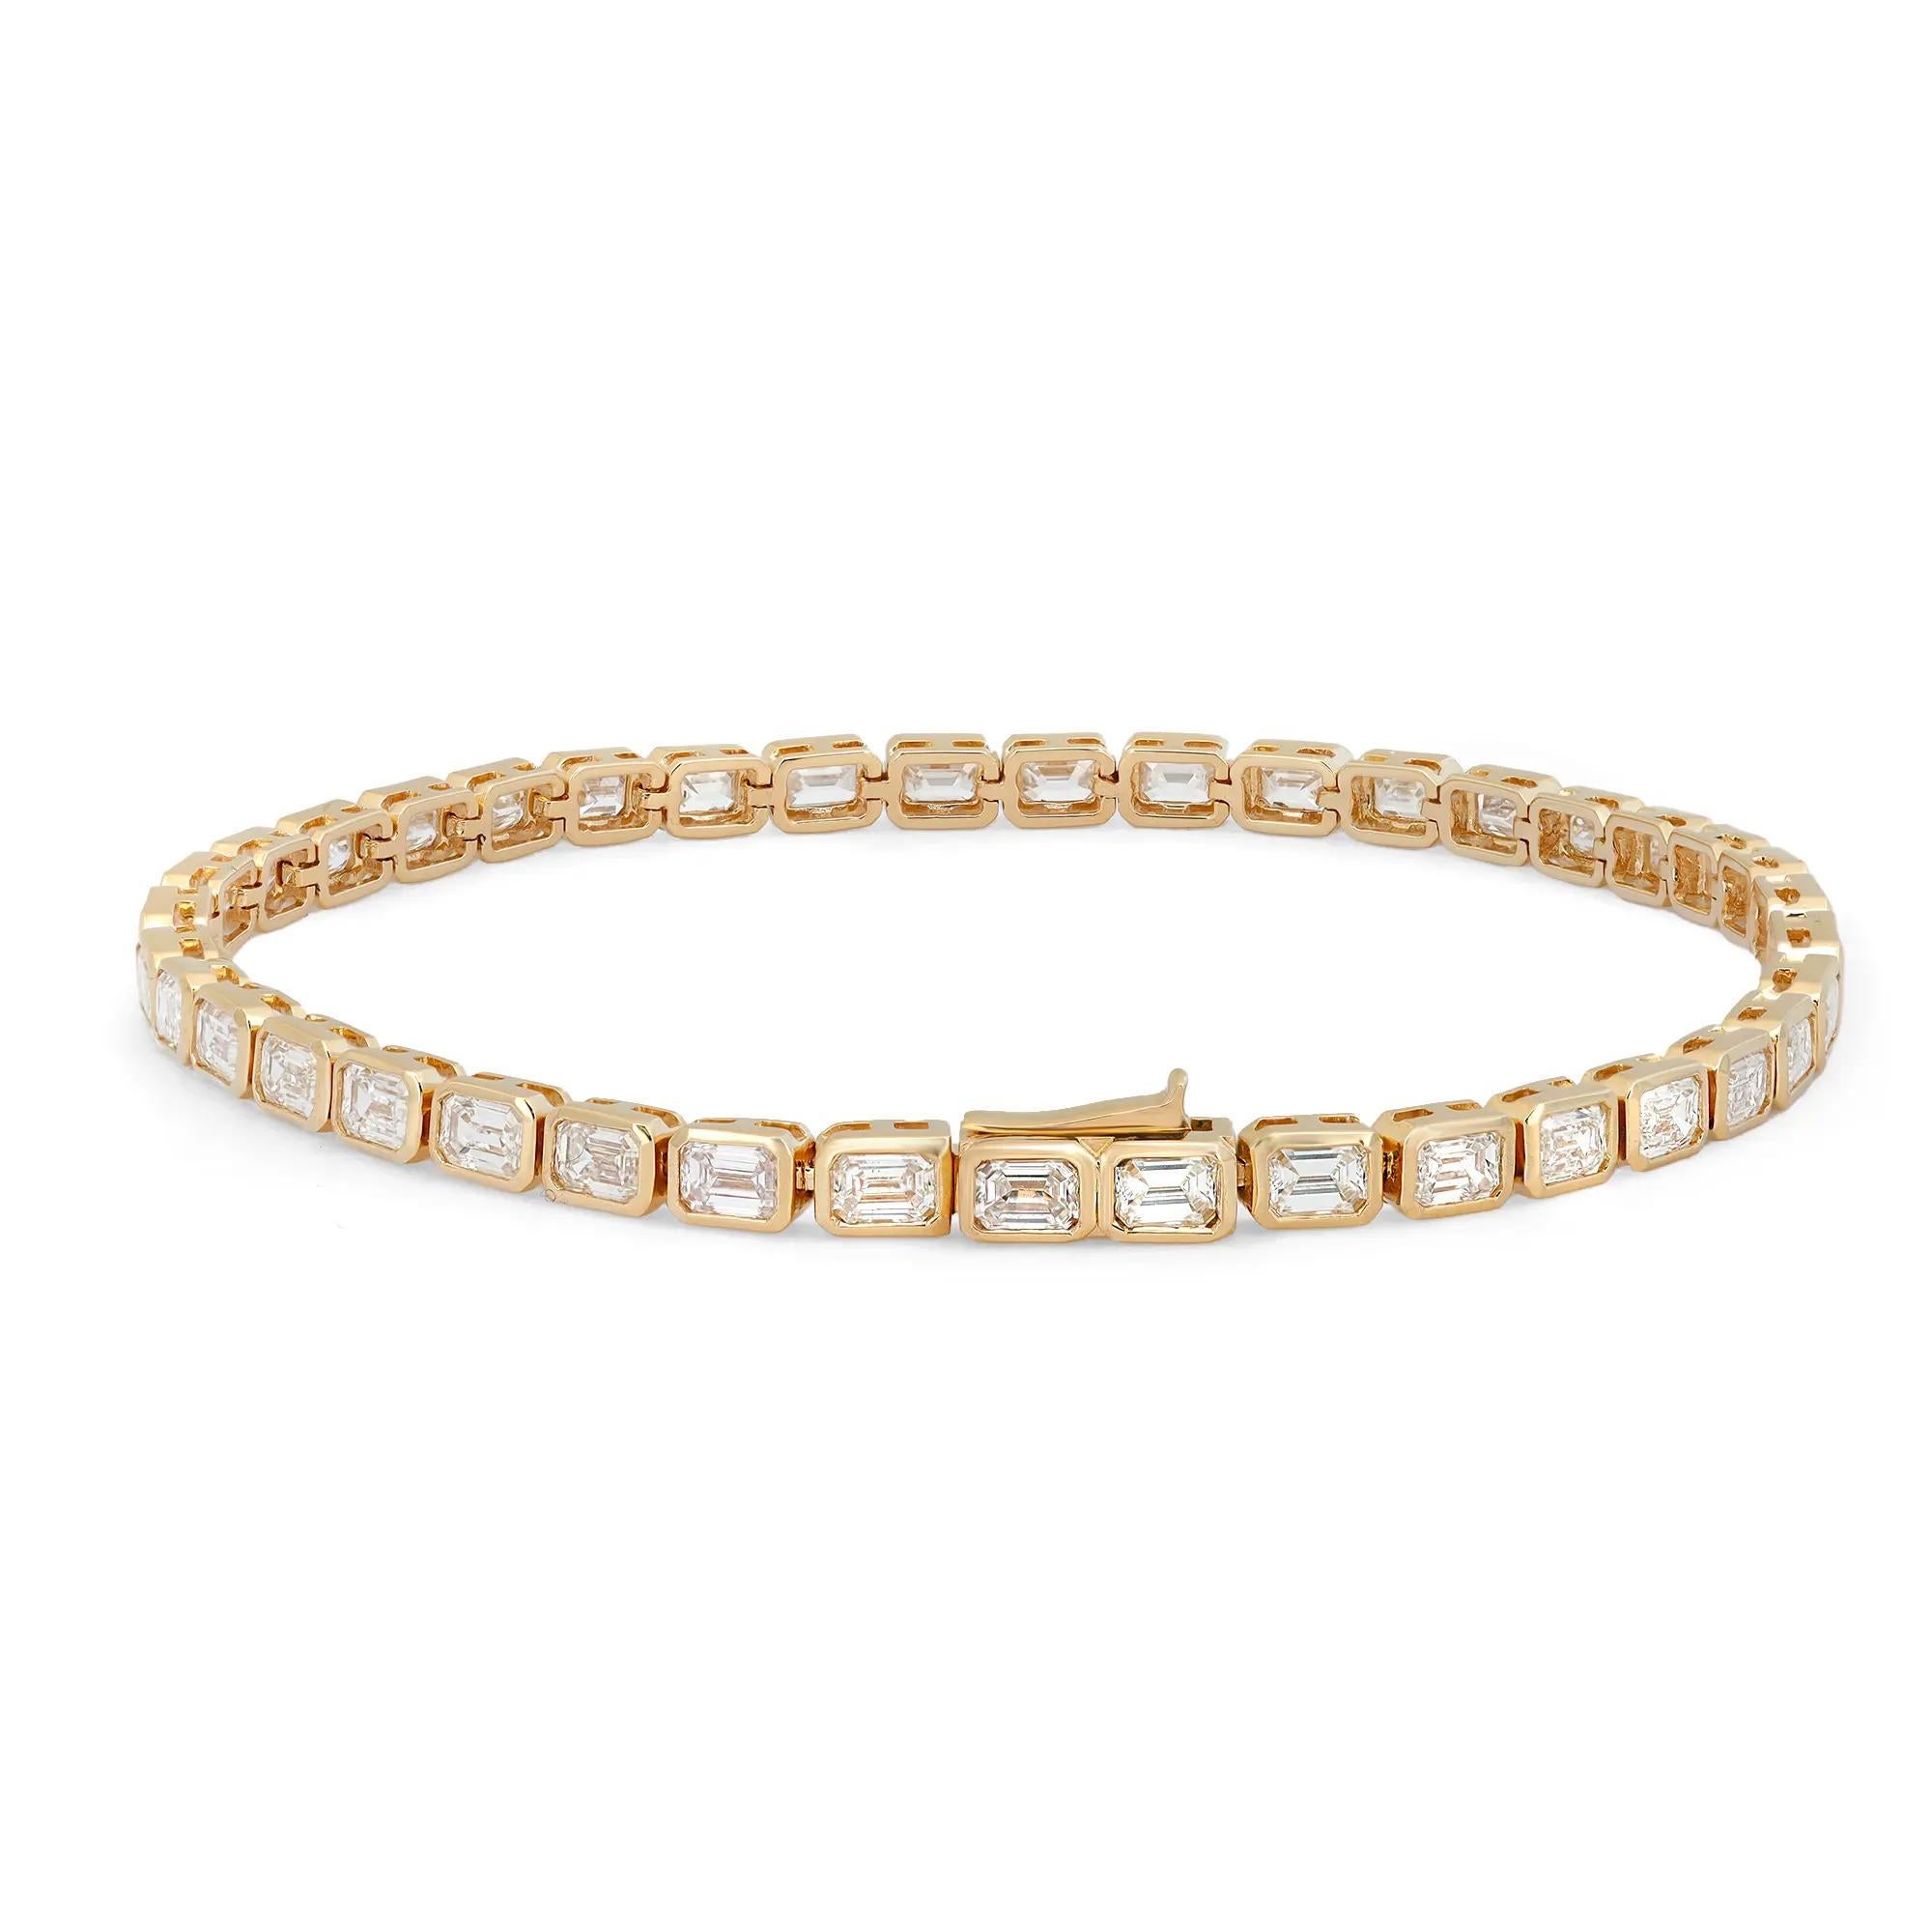 Classic yet elegant, this breathtaking tennis bracelet is crafted in 18K yellow gold with 39 bezel set dazzling emerald cut diamonds. Total diamond weight: 7.00 carats. The bright white diamonds are G-H color and VS-SI clarity. Bracelet length: 7